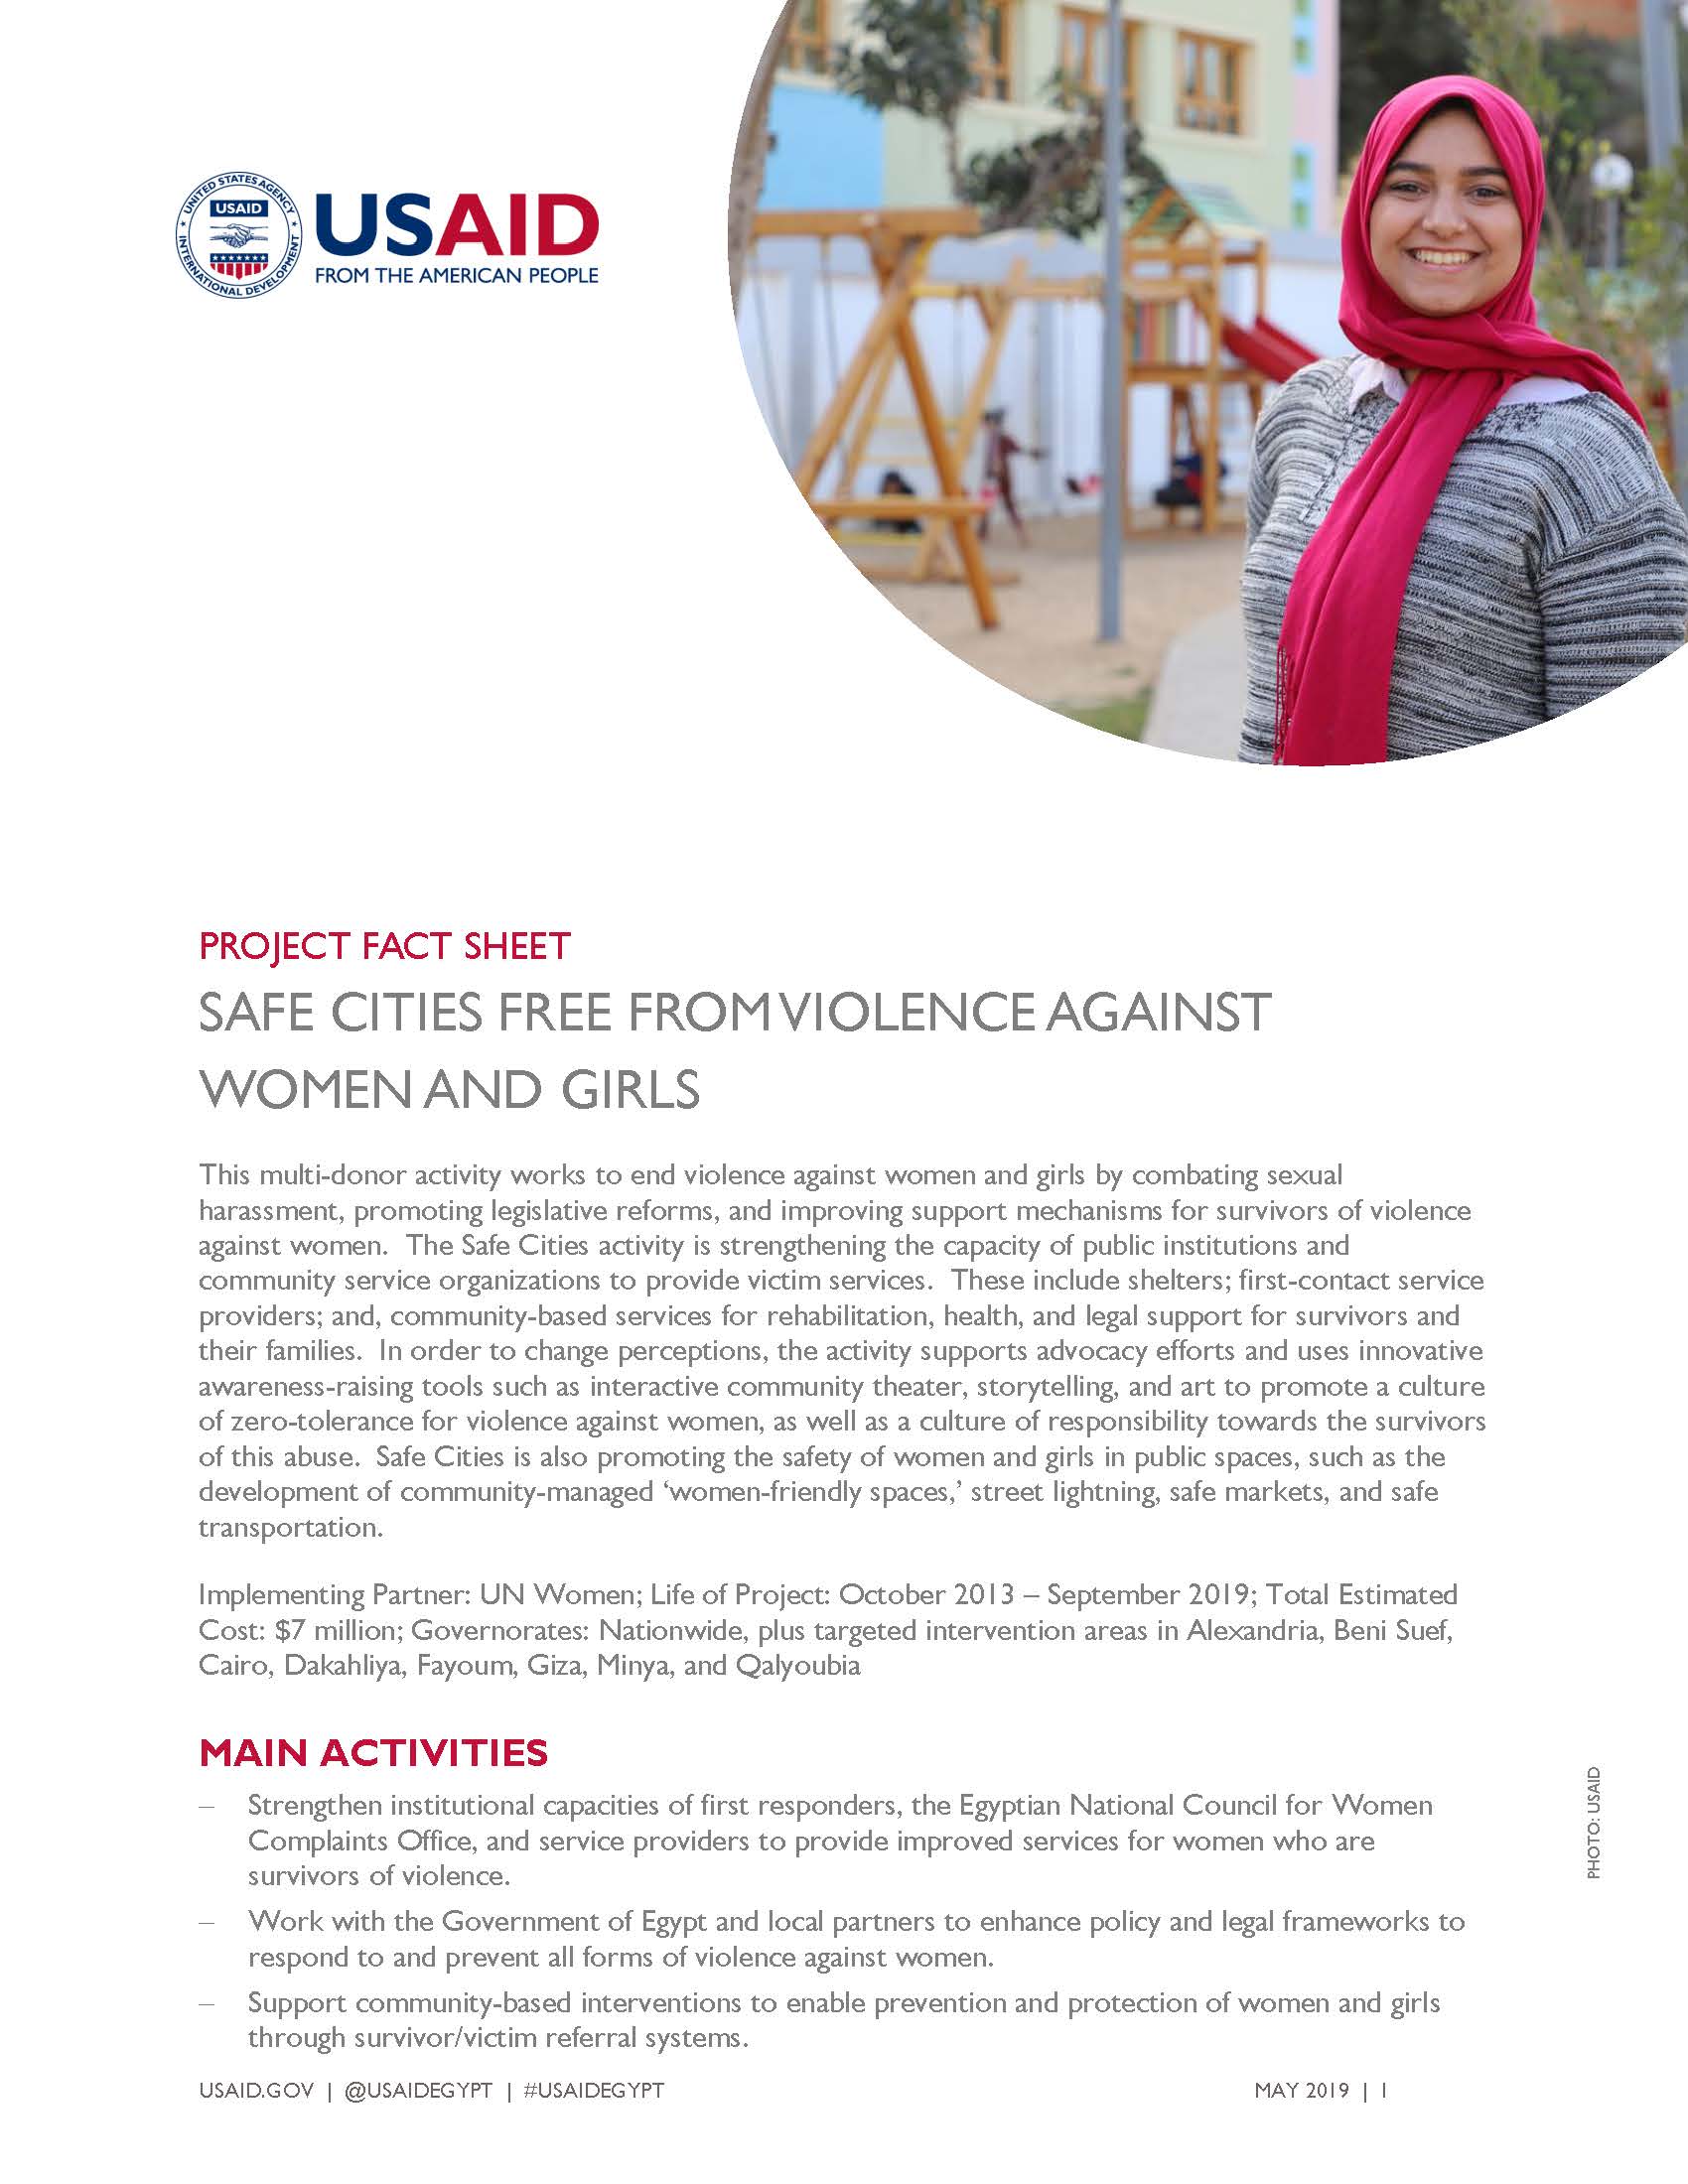 USAID/Egypt Fact Sheet: Safe Cities Free From Violence Against Women and Girls